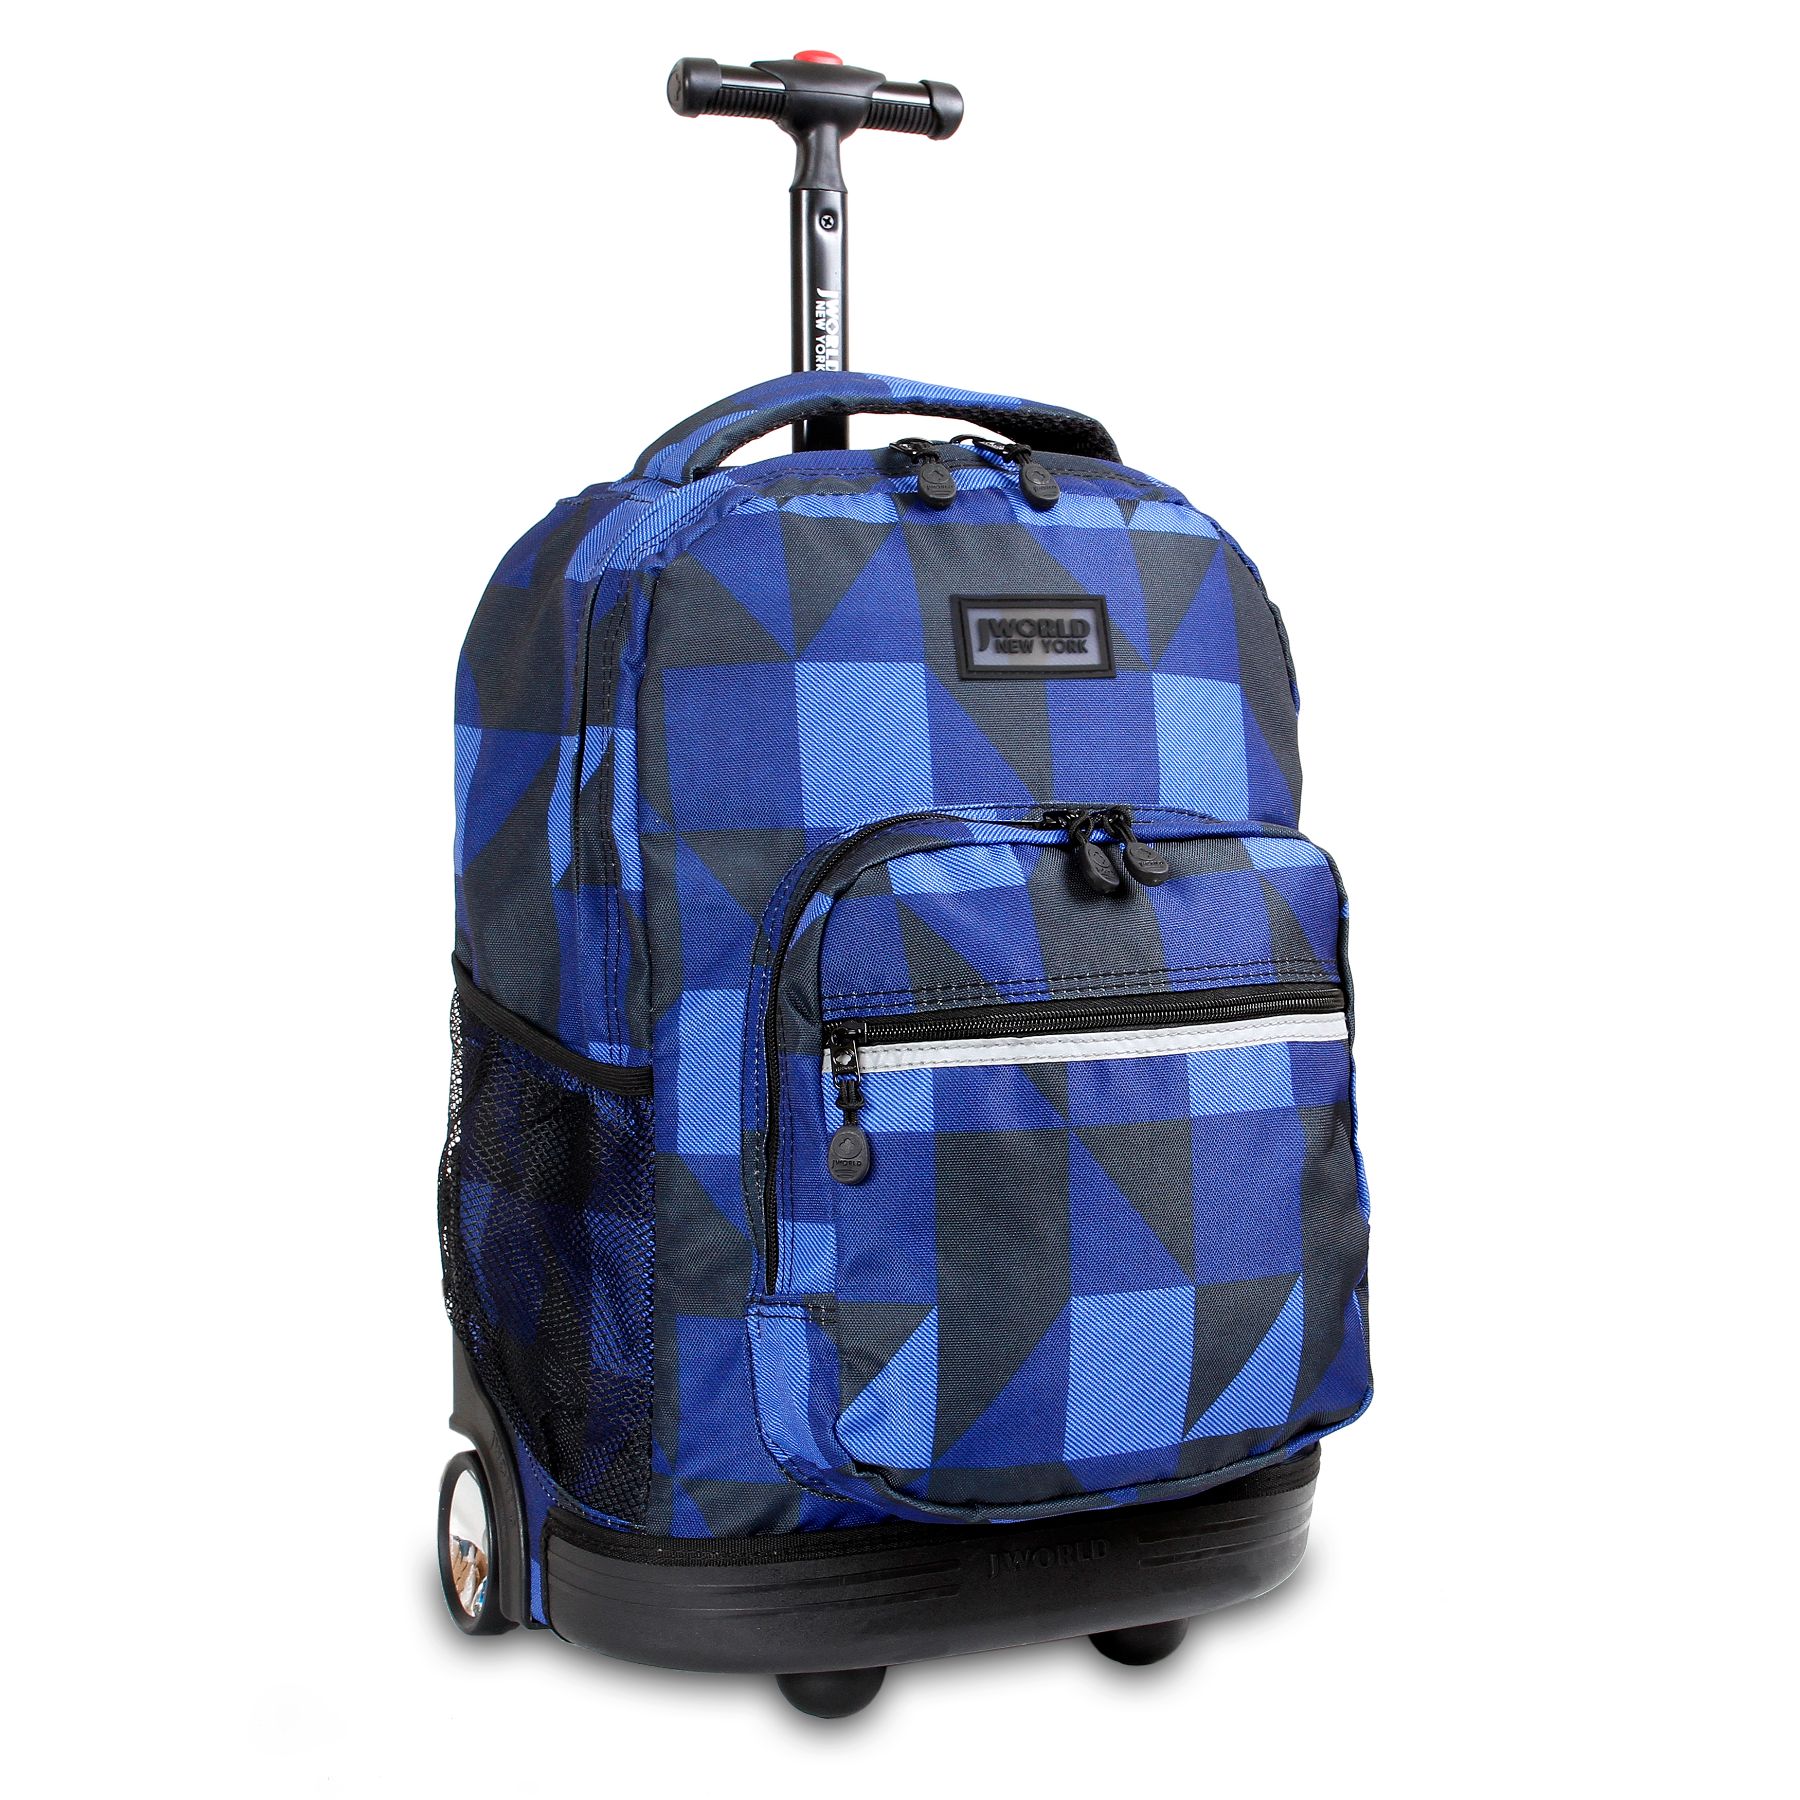 J World Boys and Girls Sunrise 18" Rolling Backpack for School and Travel, Block Navy - image 1 of 6